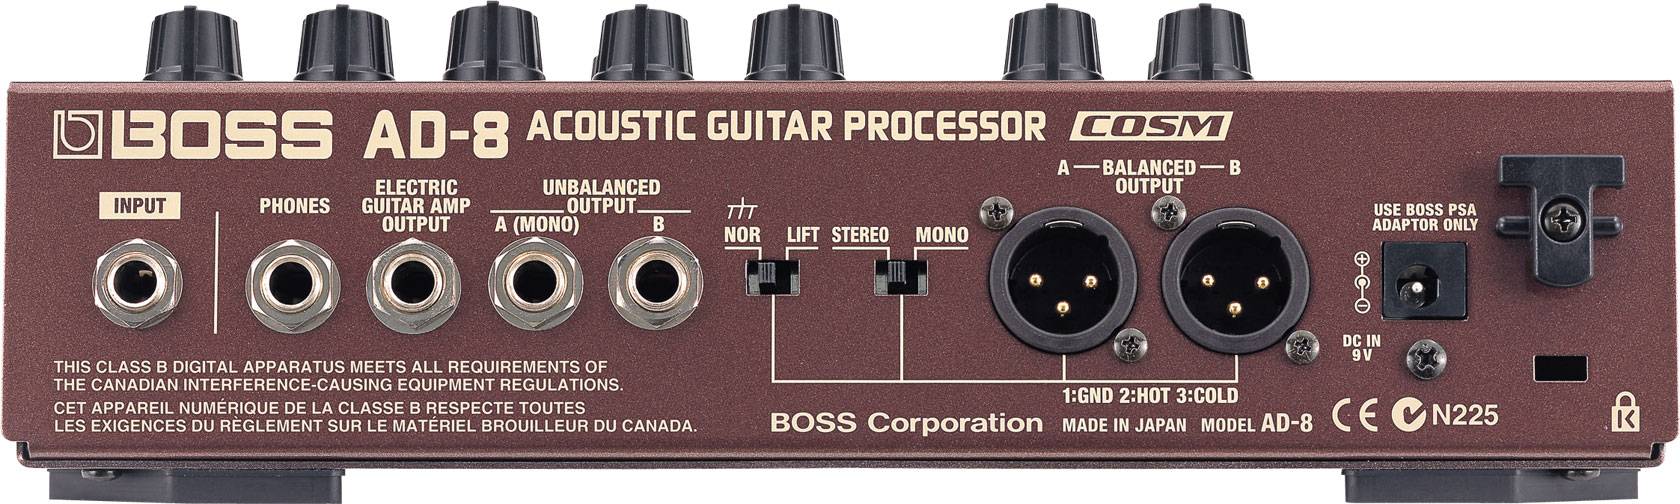 BOSS AD-8 Acoustic Instruments Pedal